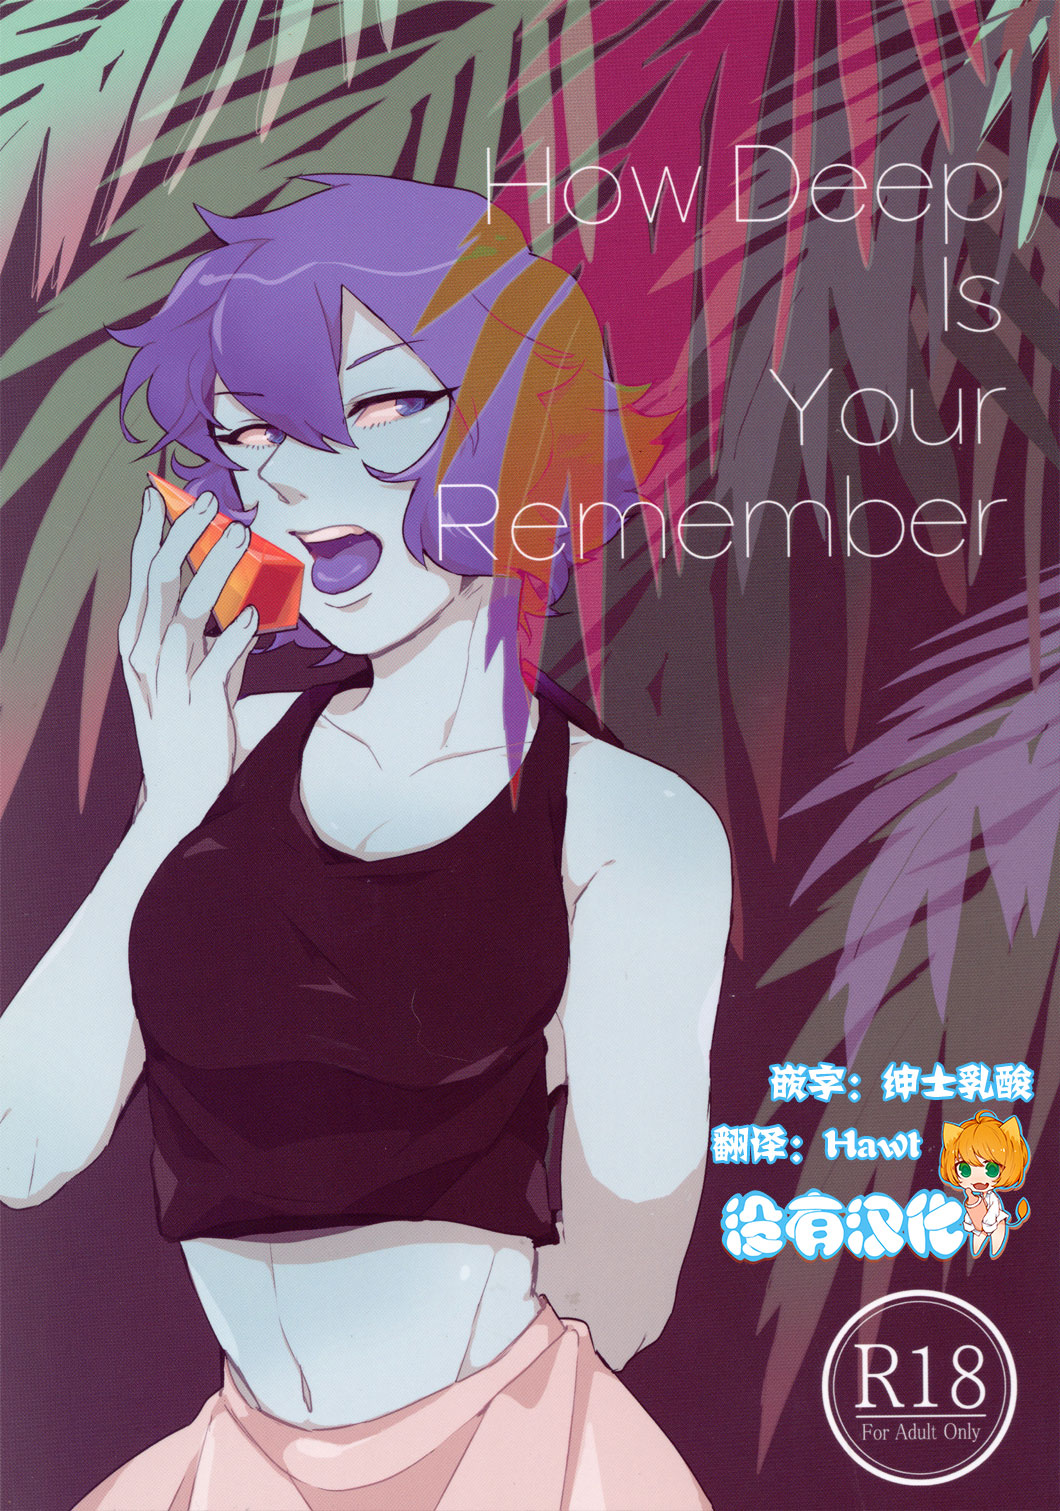 (GOOD COMIC CITY 24) [G-PLANET (Gram)] How Deep Is Your Remember (Steven Universe) [Chinese] [沒有漢化] (GOOD COMIC CITY 24) [G-PLANET (グラム)] How Deep Is Your Remember (スティーブン・ユニバース) [中国翻訳]